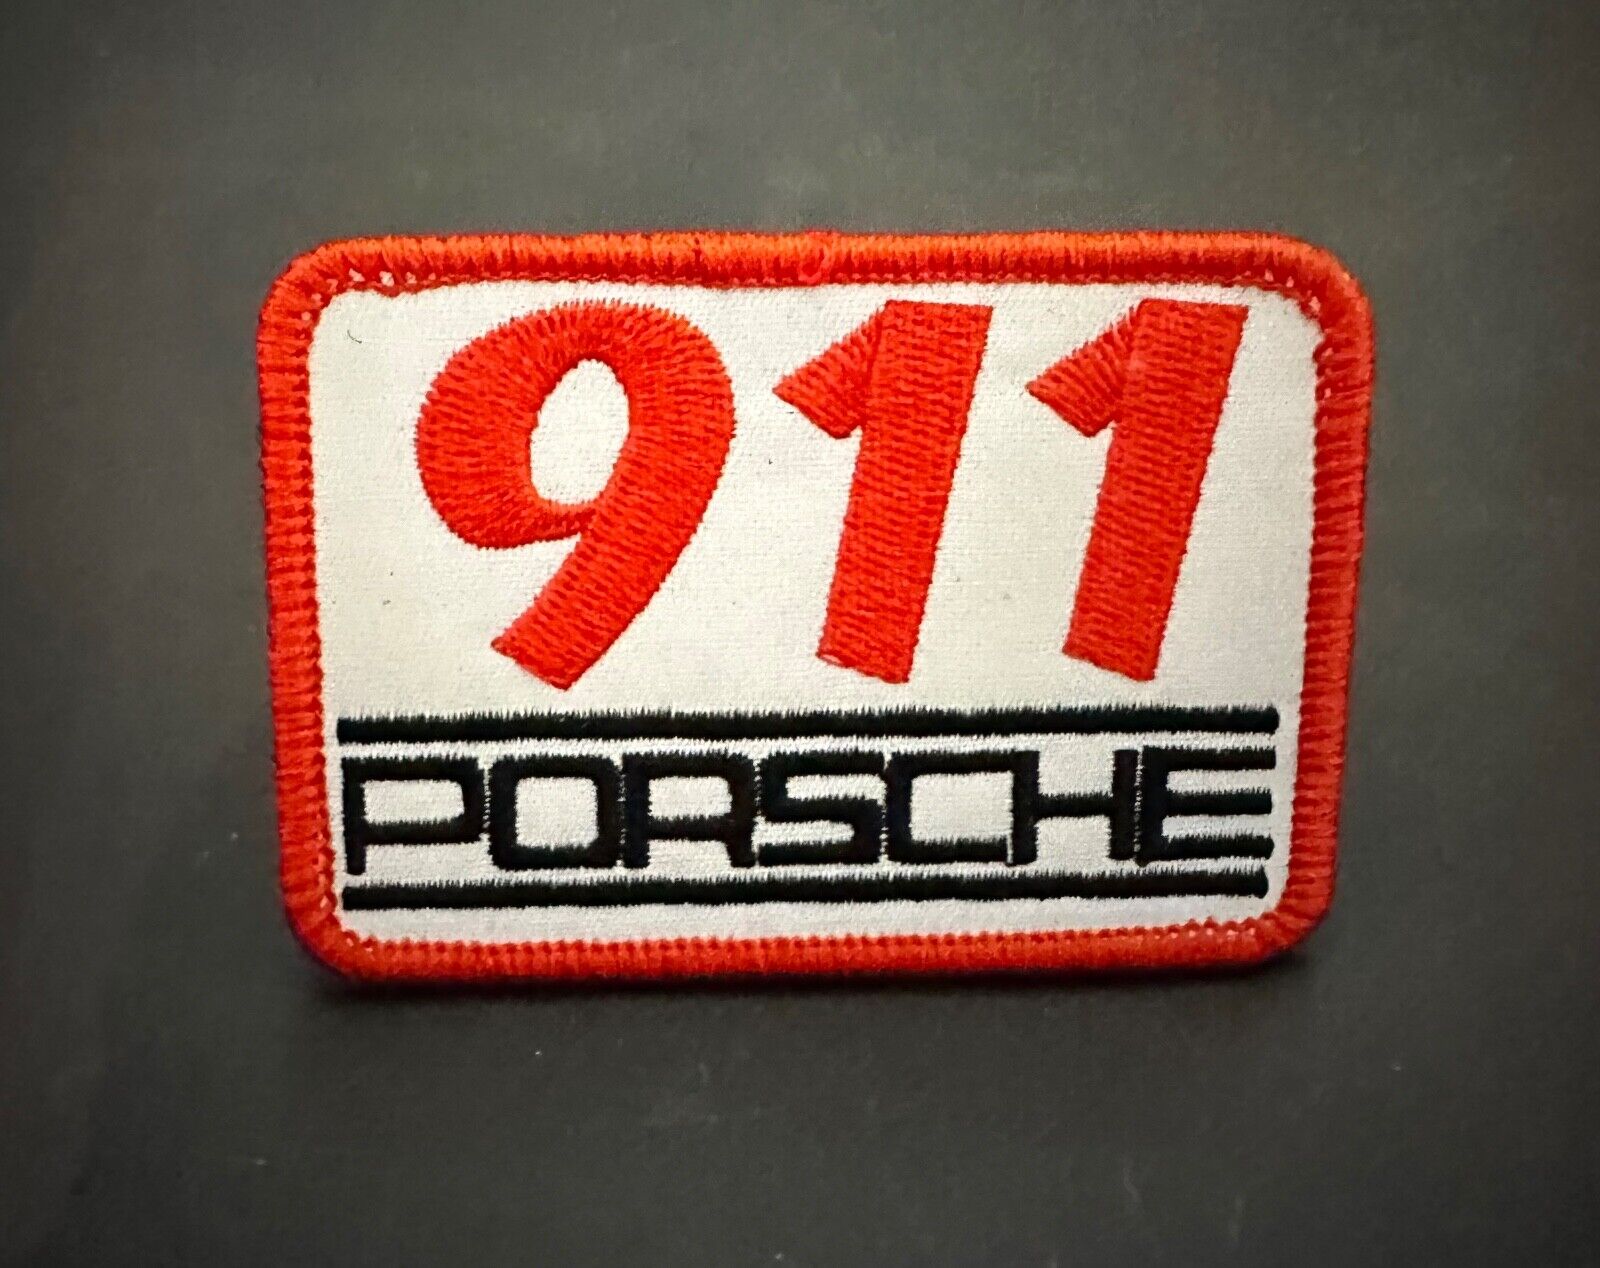 FABULOUS PORSCHE 911 EMBROIDERED IRON-ON PATCH...